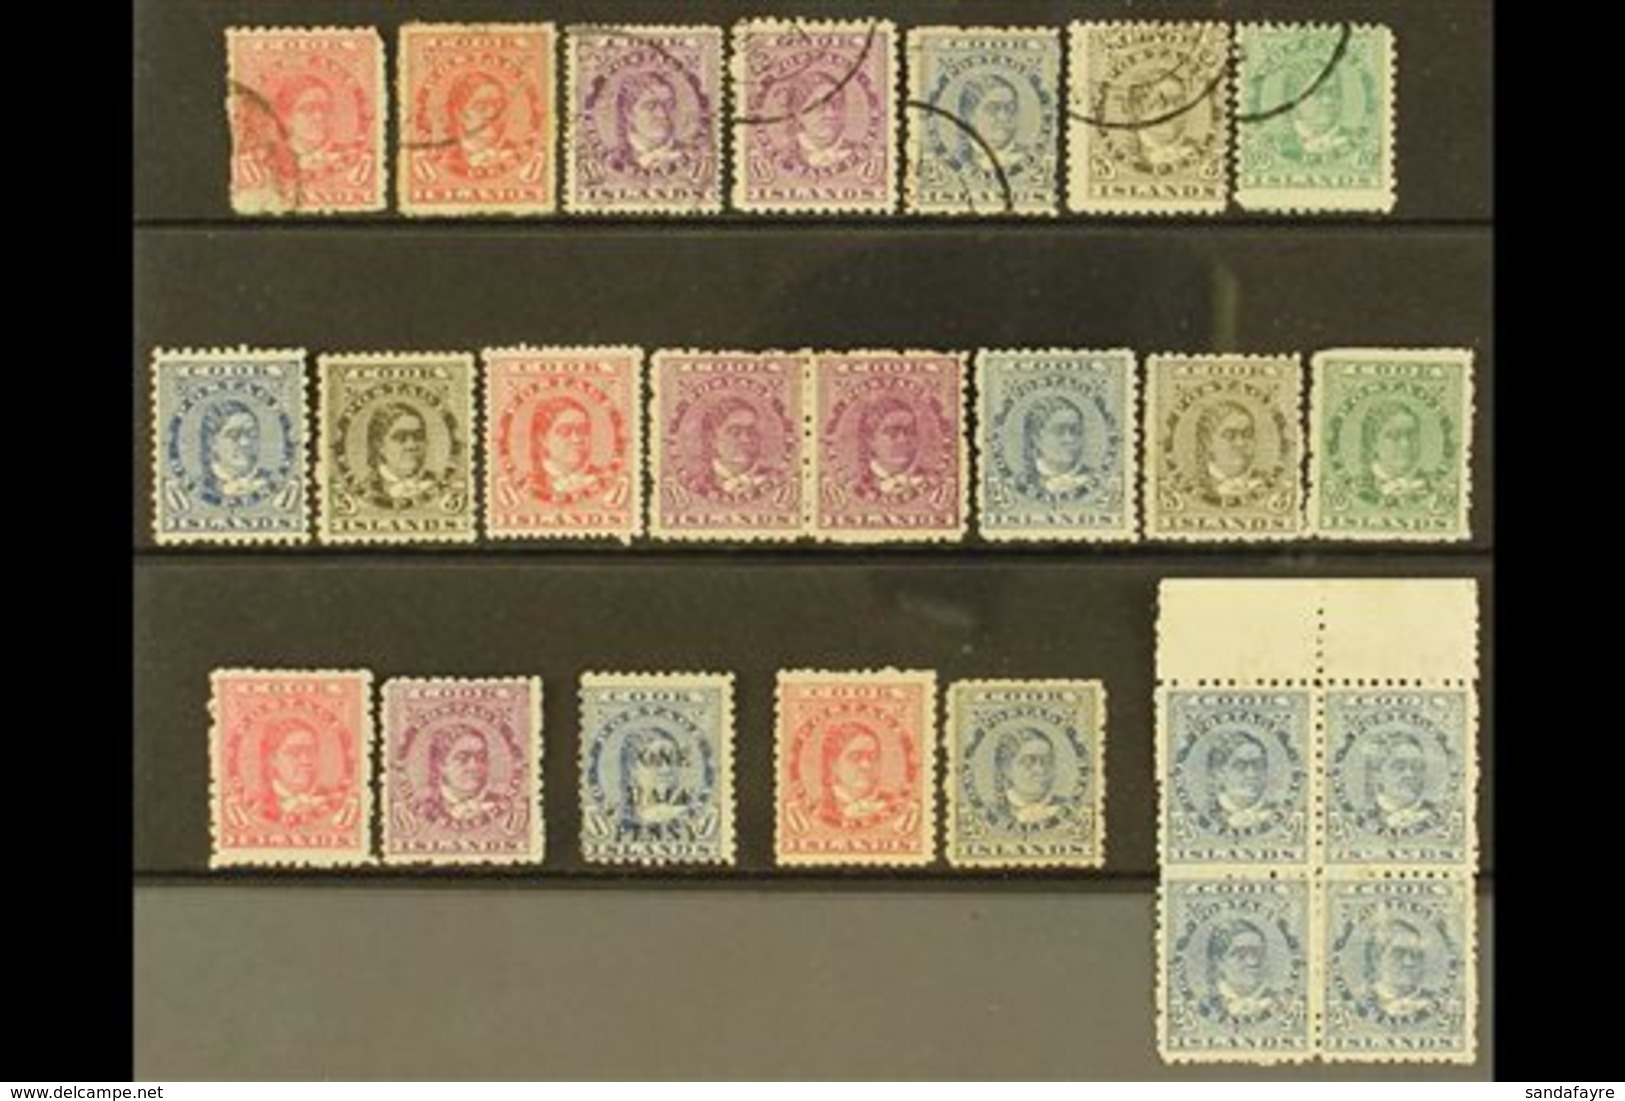 \Y 1893 - 1913 QUEEN MAKEA TAKAU ISSUES\Y 1893 Vals To 5d Olive, Perf 11 Vals To 10d Used, 1899 ½d On 1d Blue, 1902 No W - Cook Islands